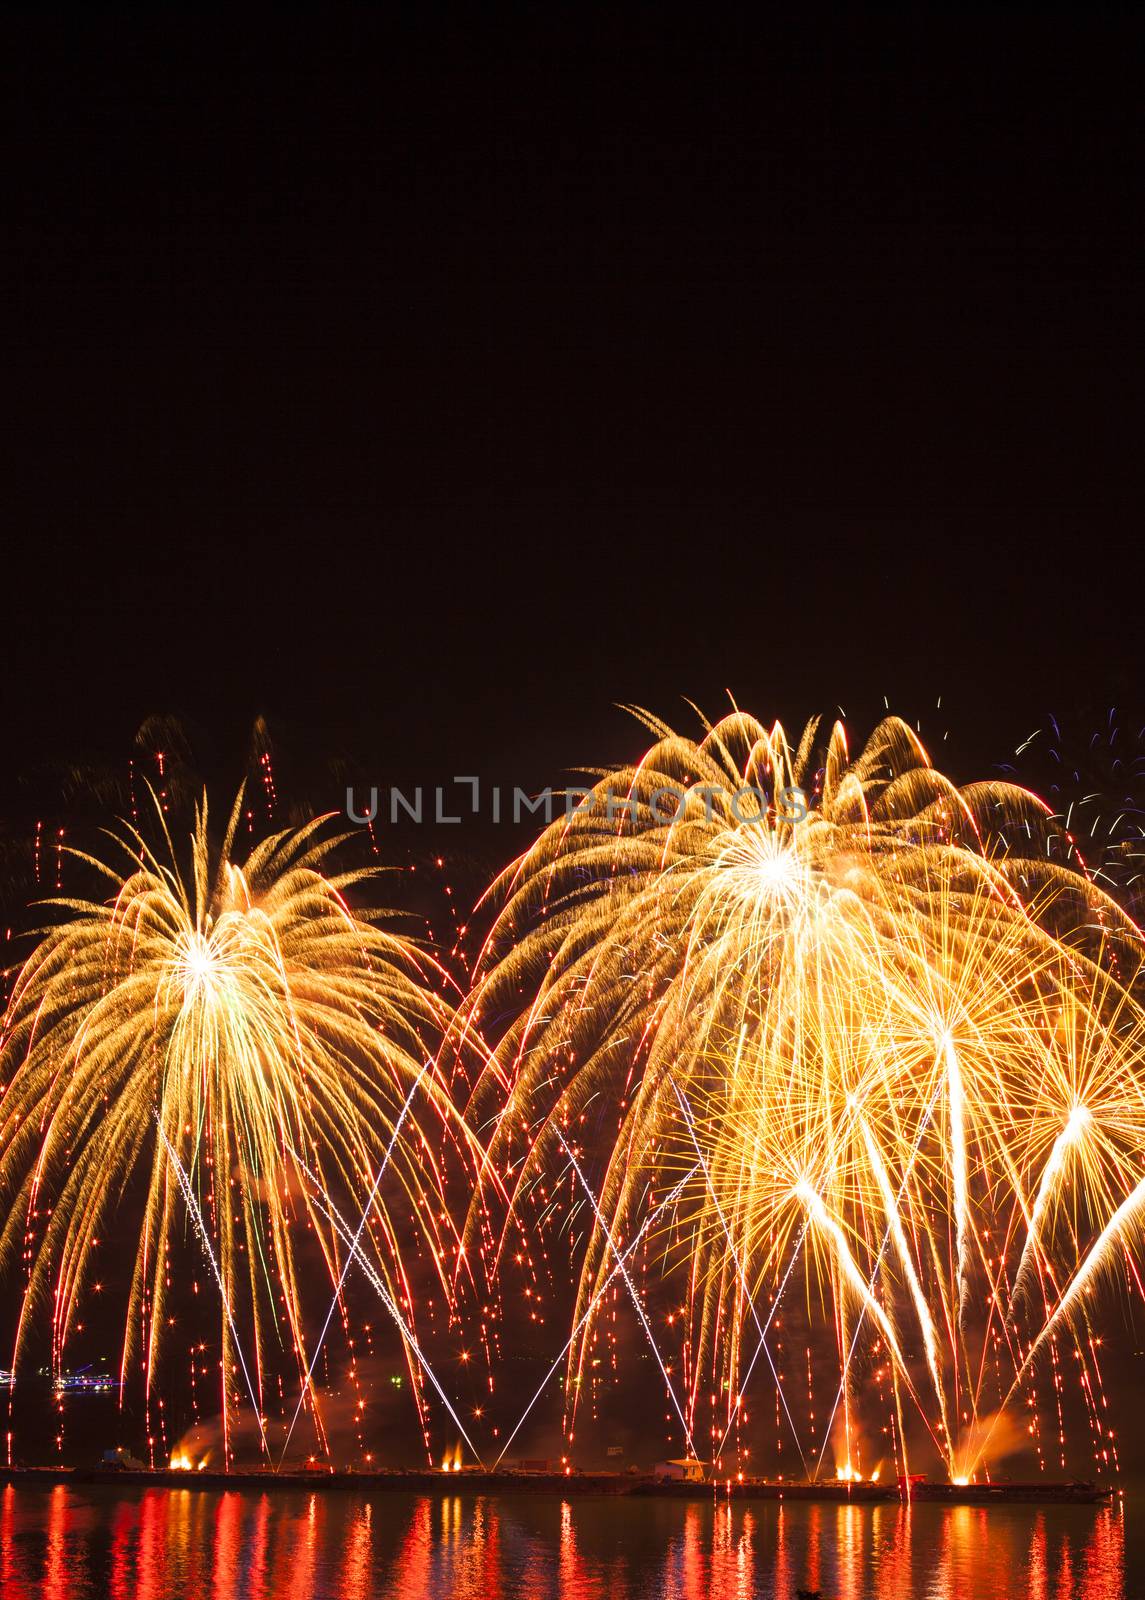 Volleys of beautiful fireworks in the night sky by jee1999